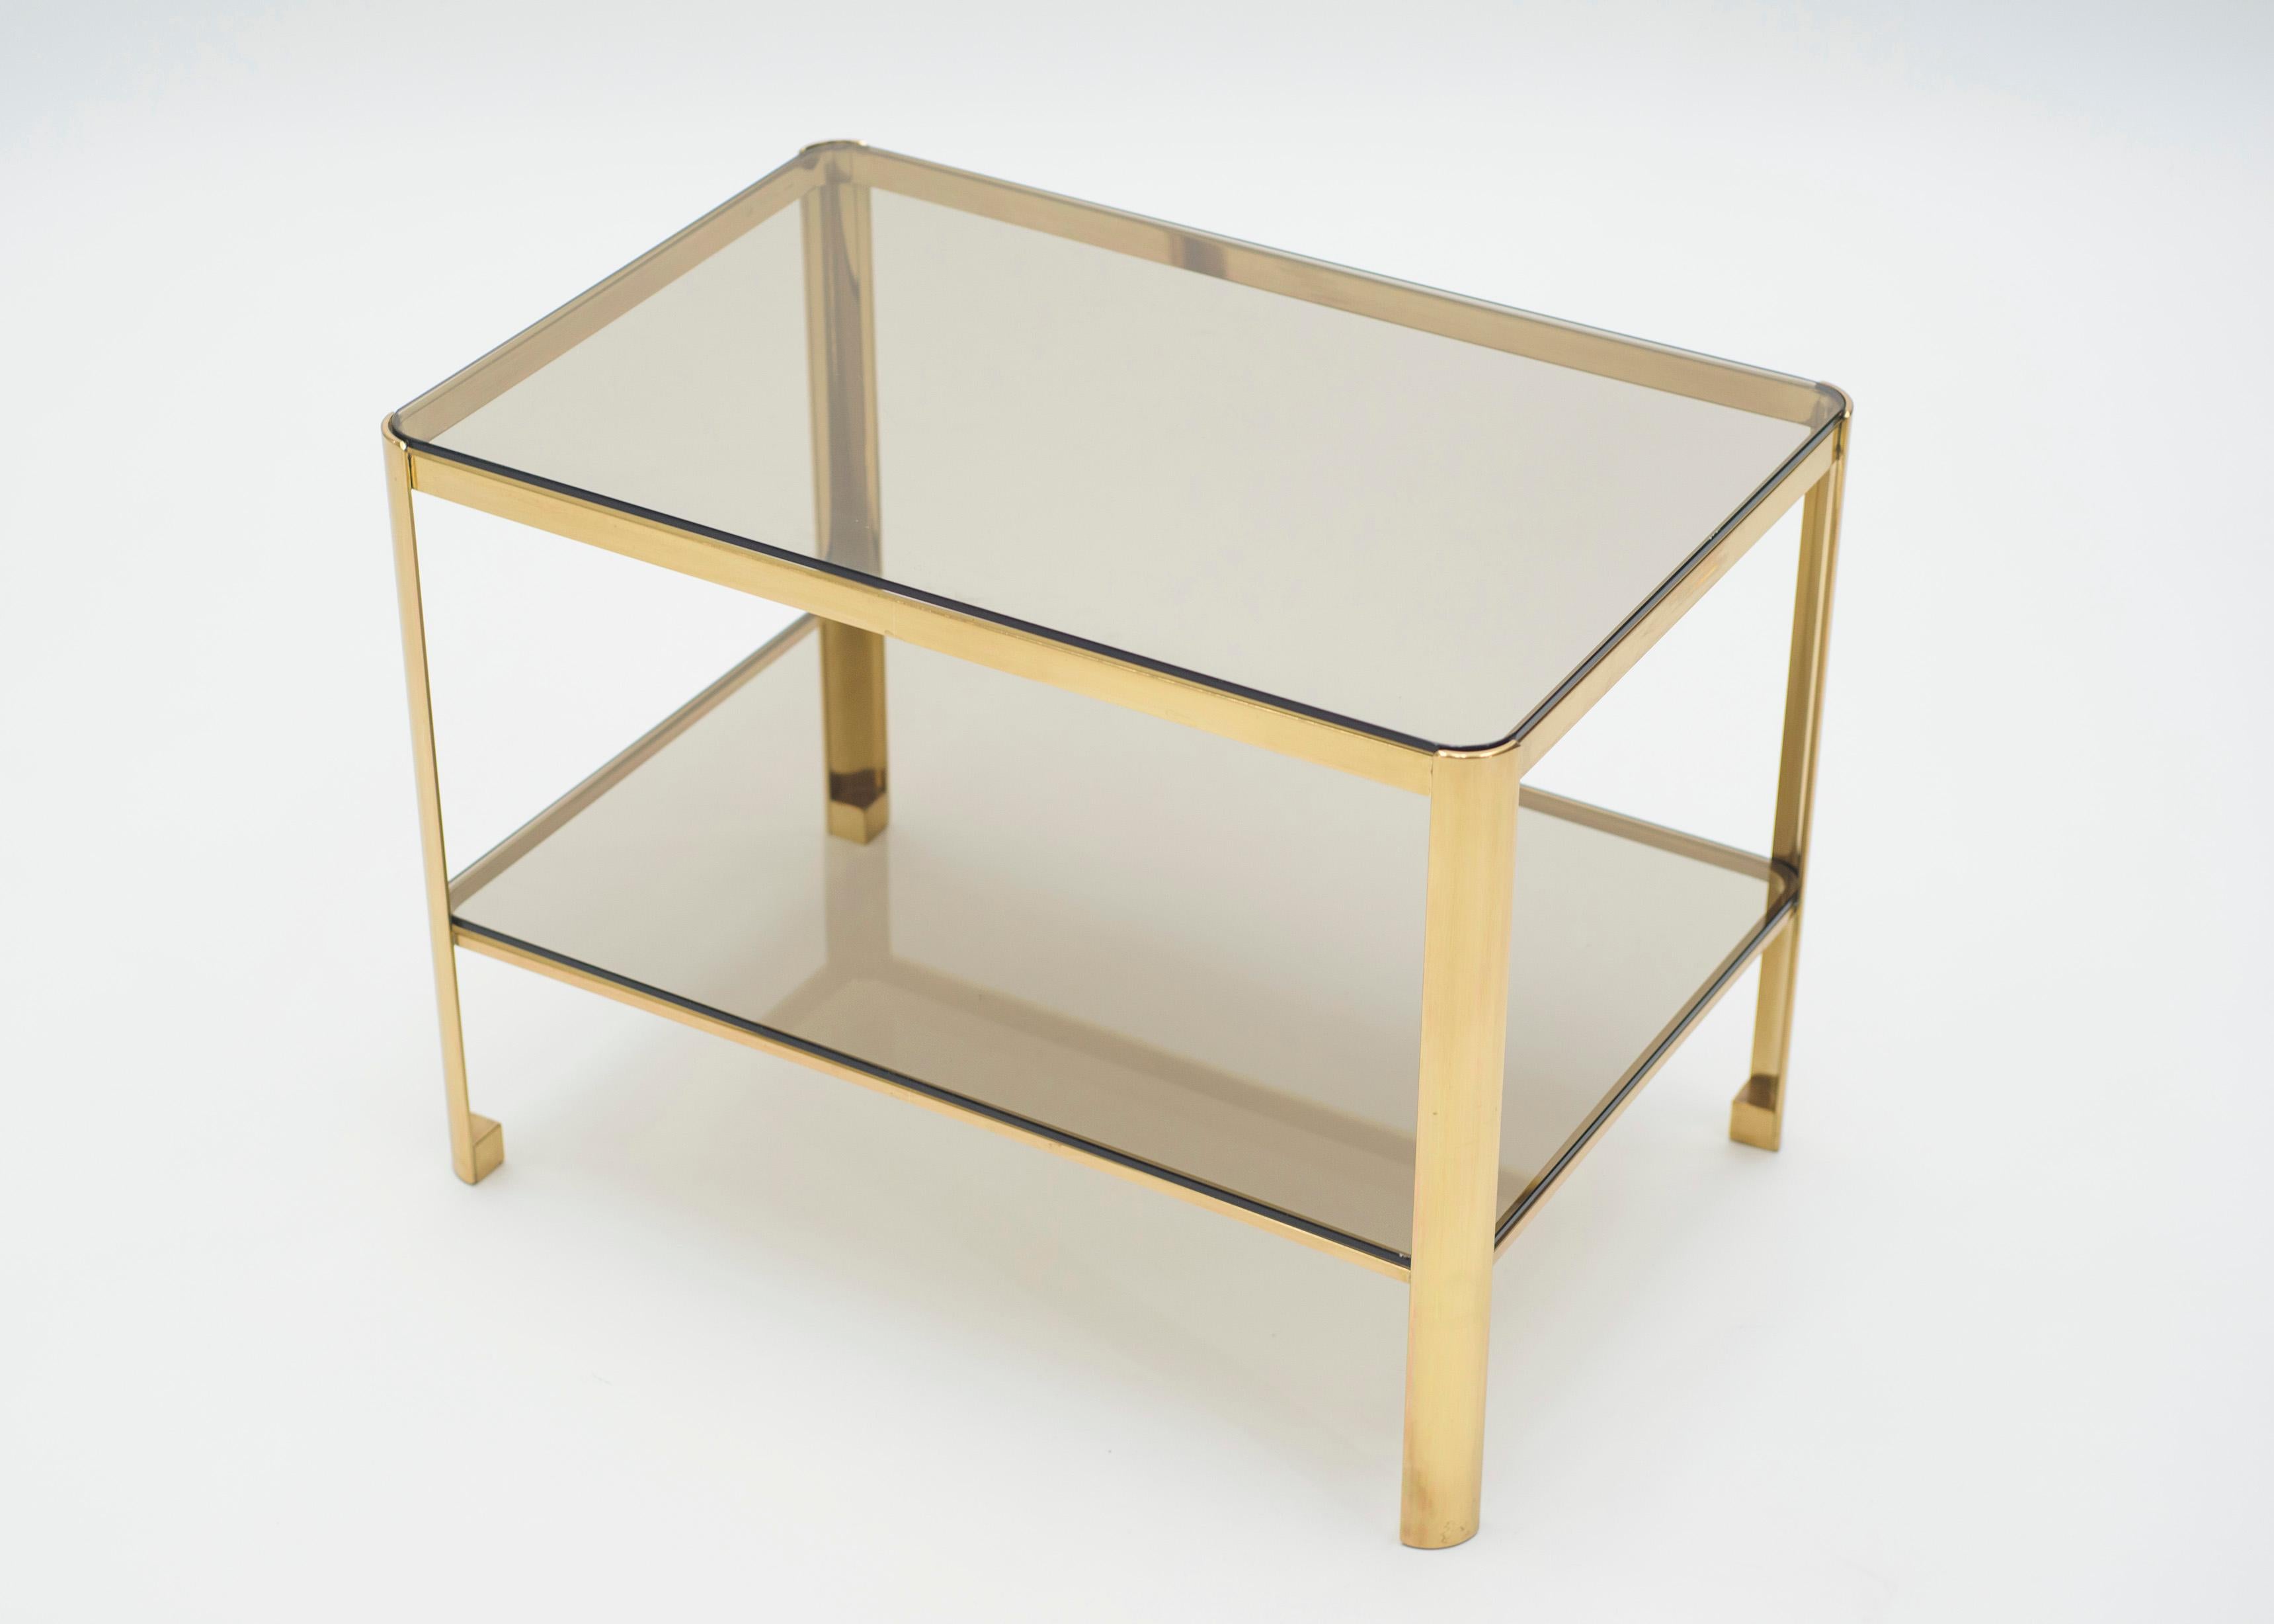 French Bronze Occasional Side Table by Jacques Quinet for Broncz, 1960s (Französisch)